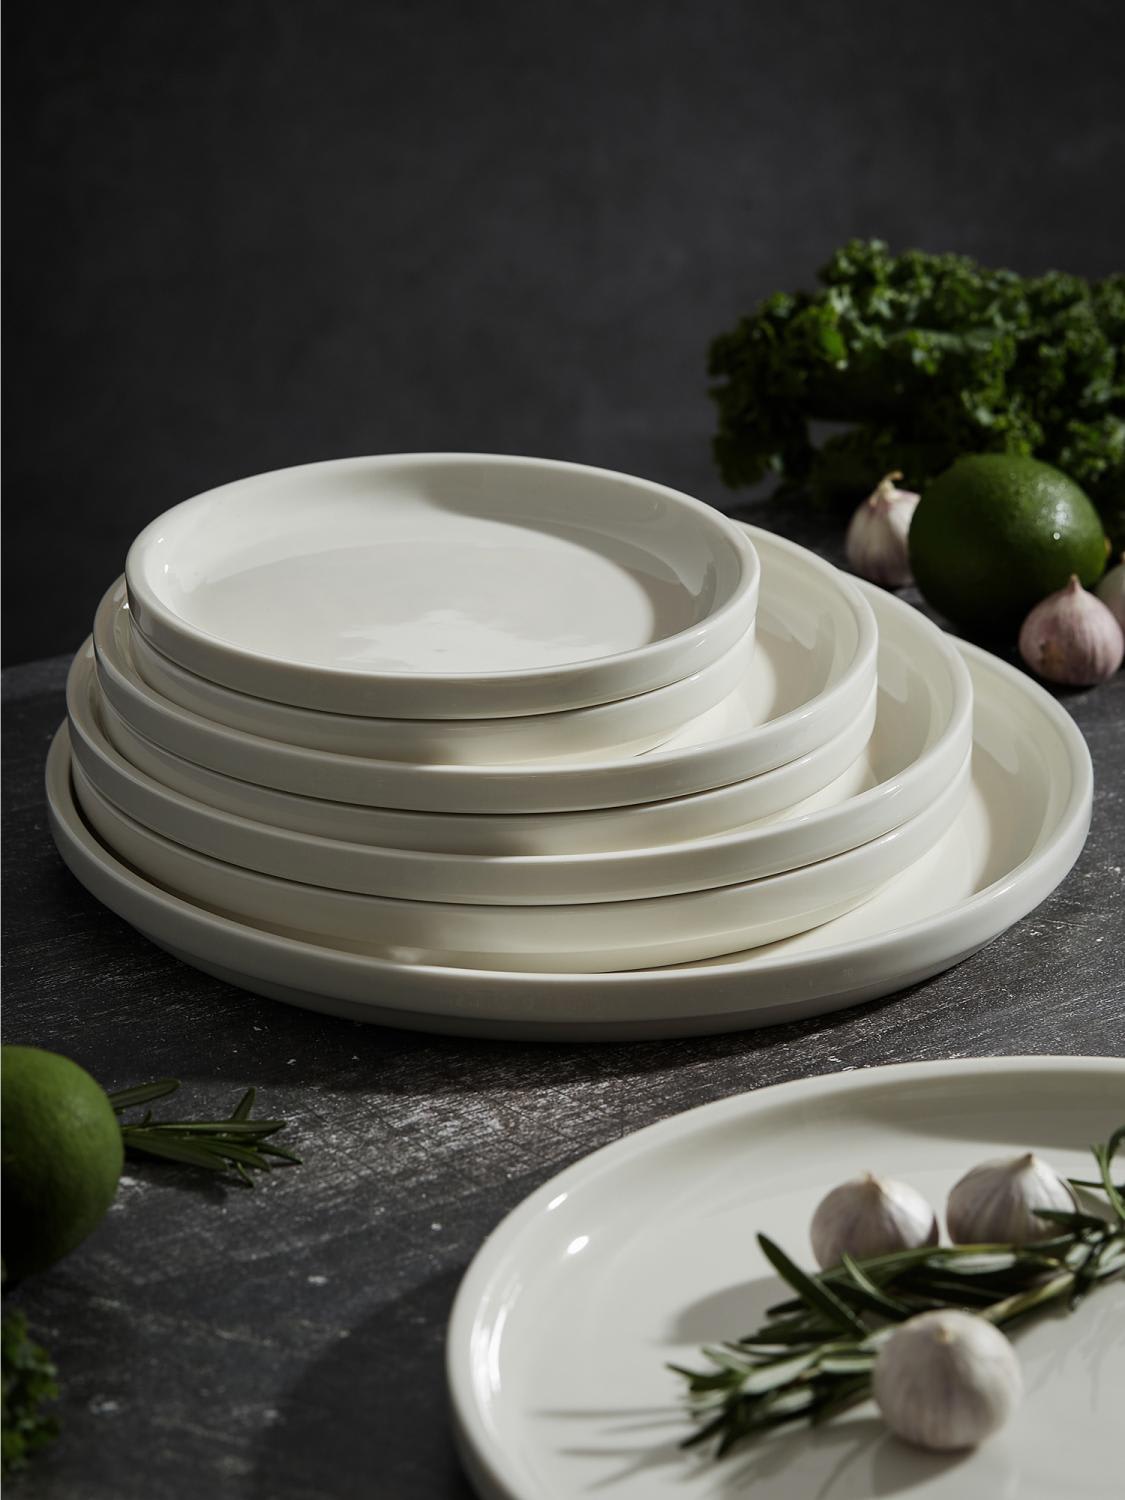 Singaporean brand Luzerne is a world leader in making tableware for ...